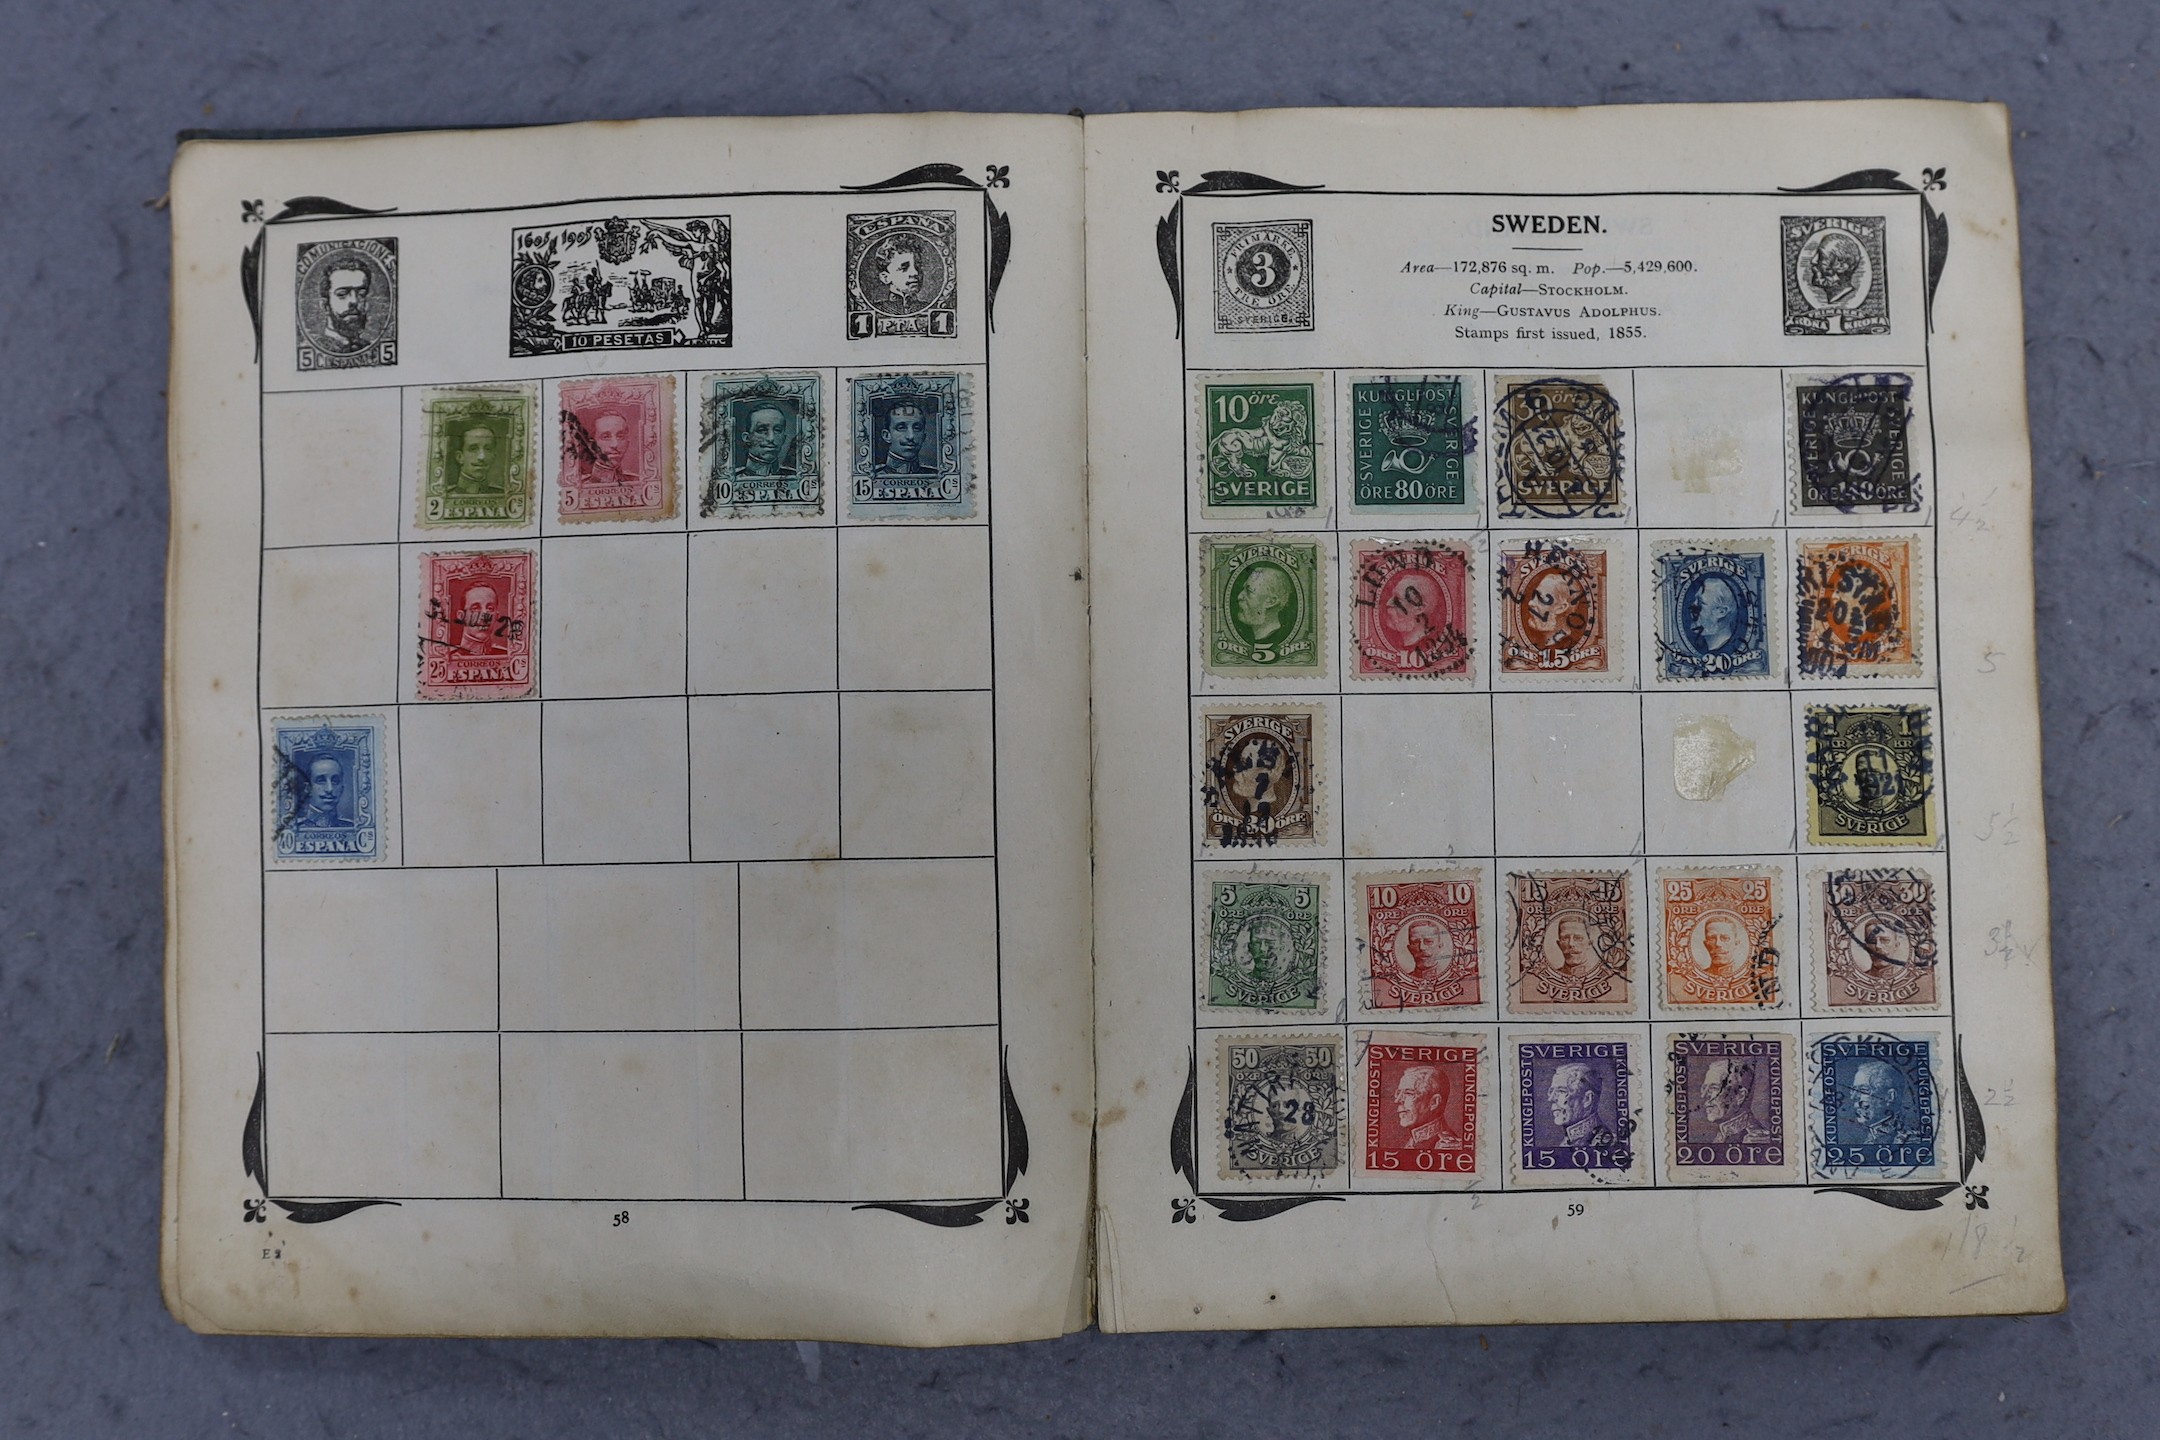 Stamps: Great Britain and British Commonwealth in four albums, with 3x 1penny black used, 1891 £1 green used, 1penny Mulready used, plus Gibraltar, India, Australian, and United States